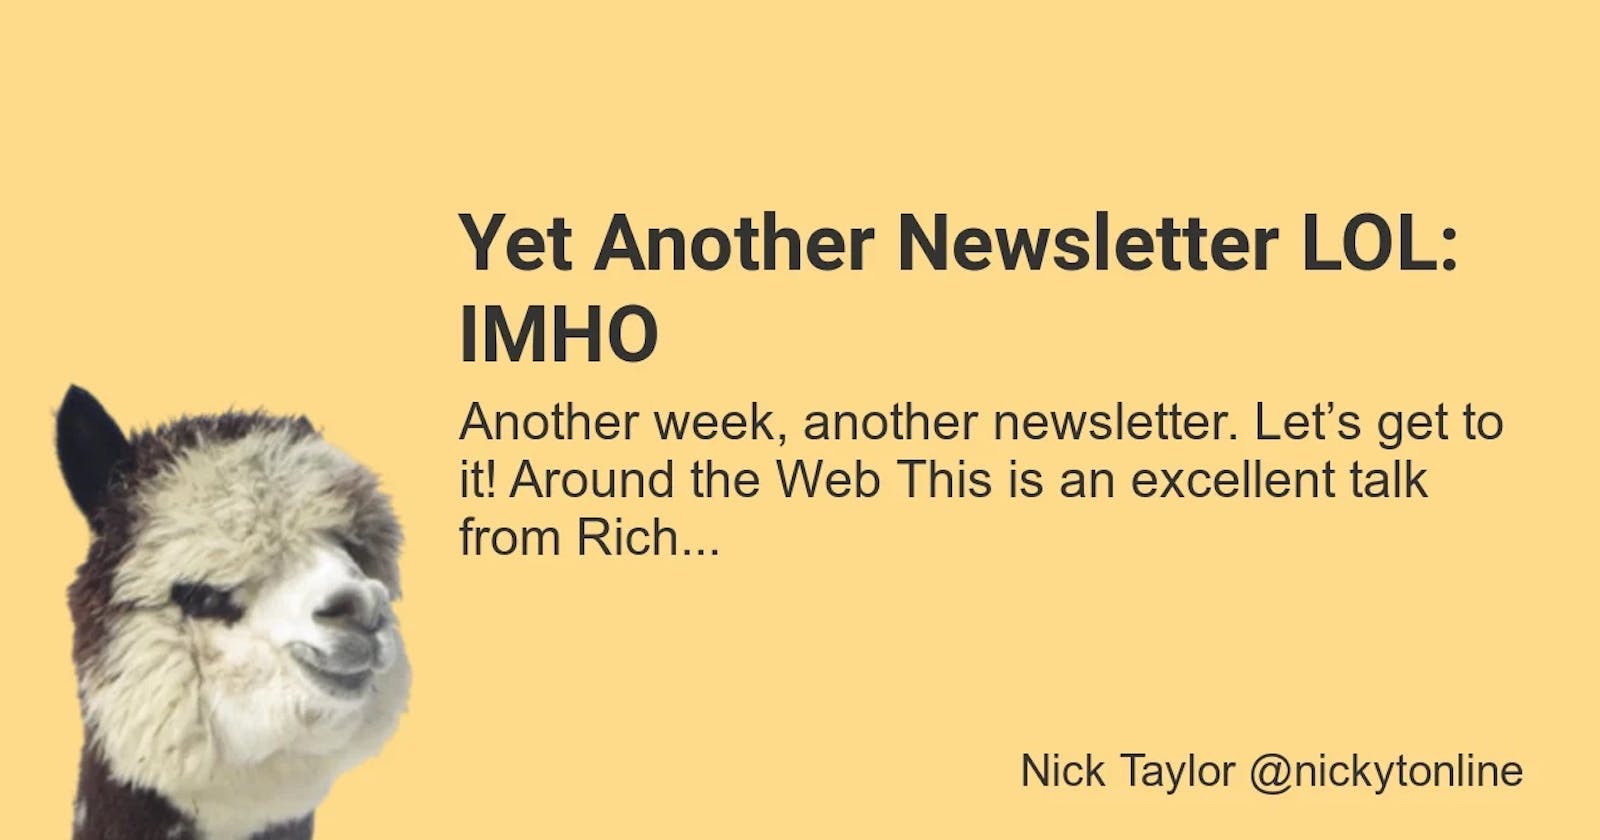 Yet Another Newsletter LOL: IMHO